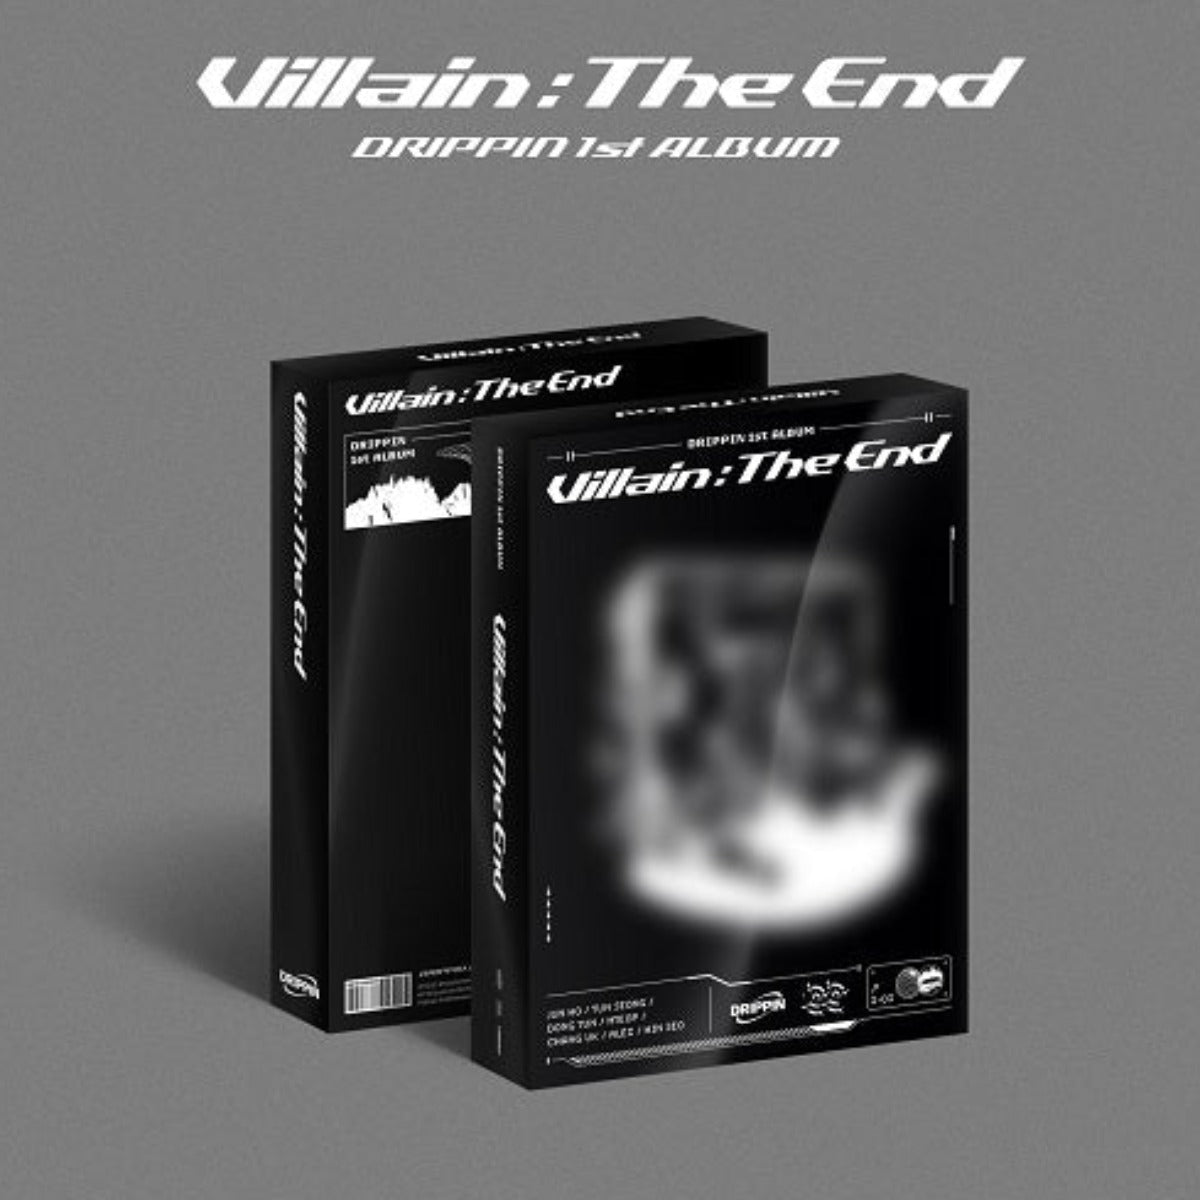 DRIPPIN Vol. 1 - Villain : The End (Limited Version)